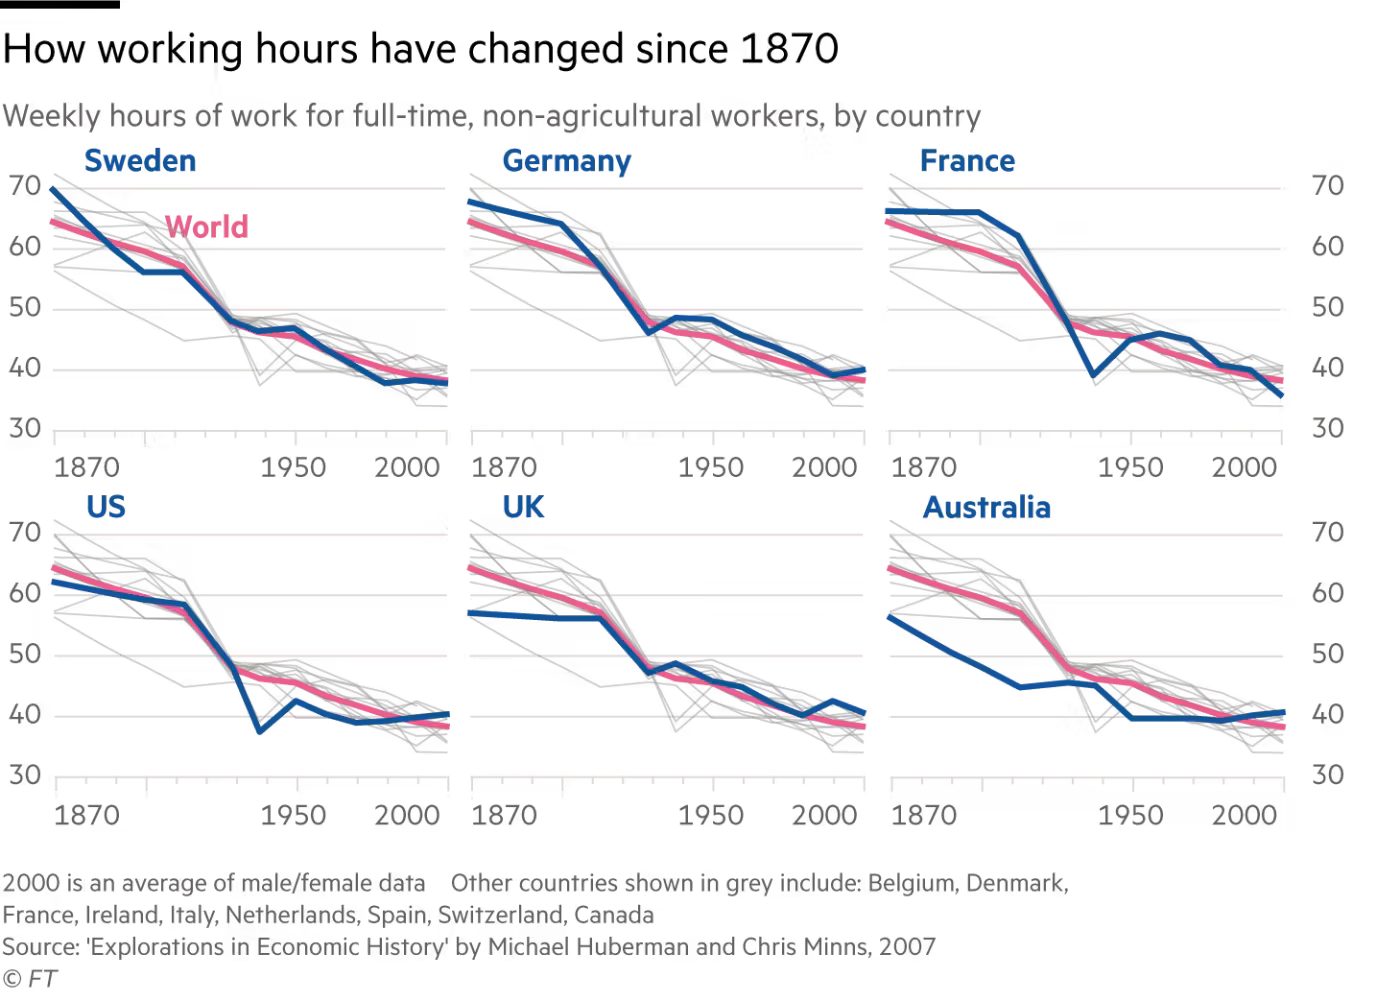 Charts from various countries showing working hours declining since 1870 for non-agricultural workers